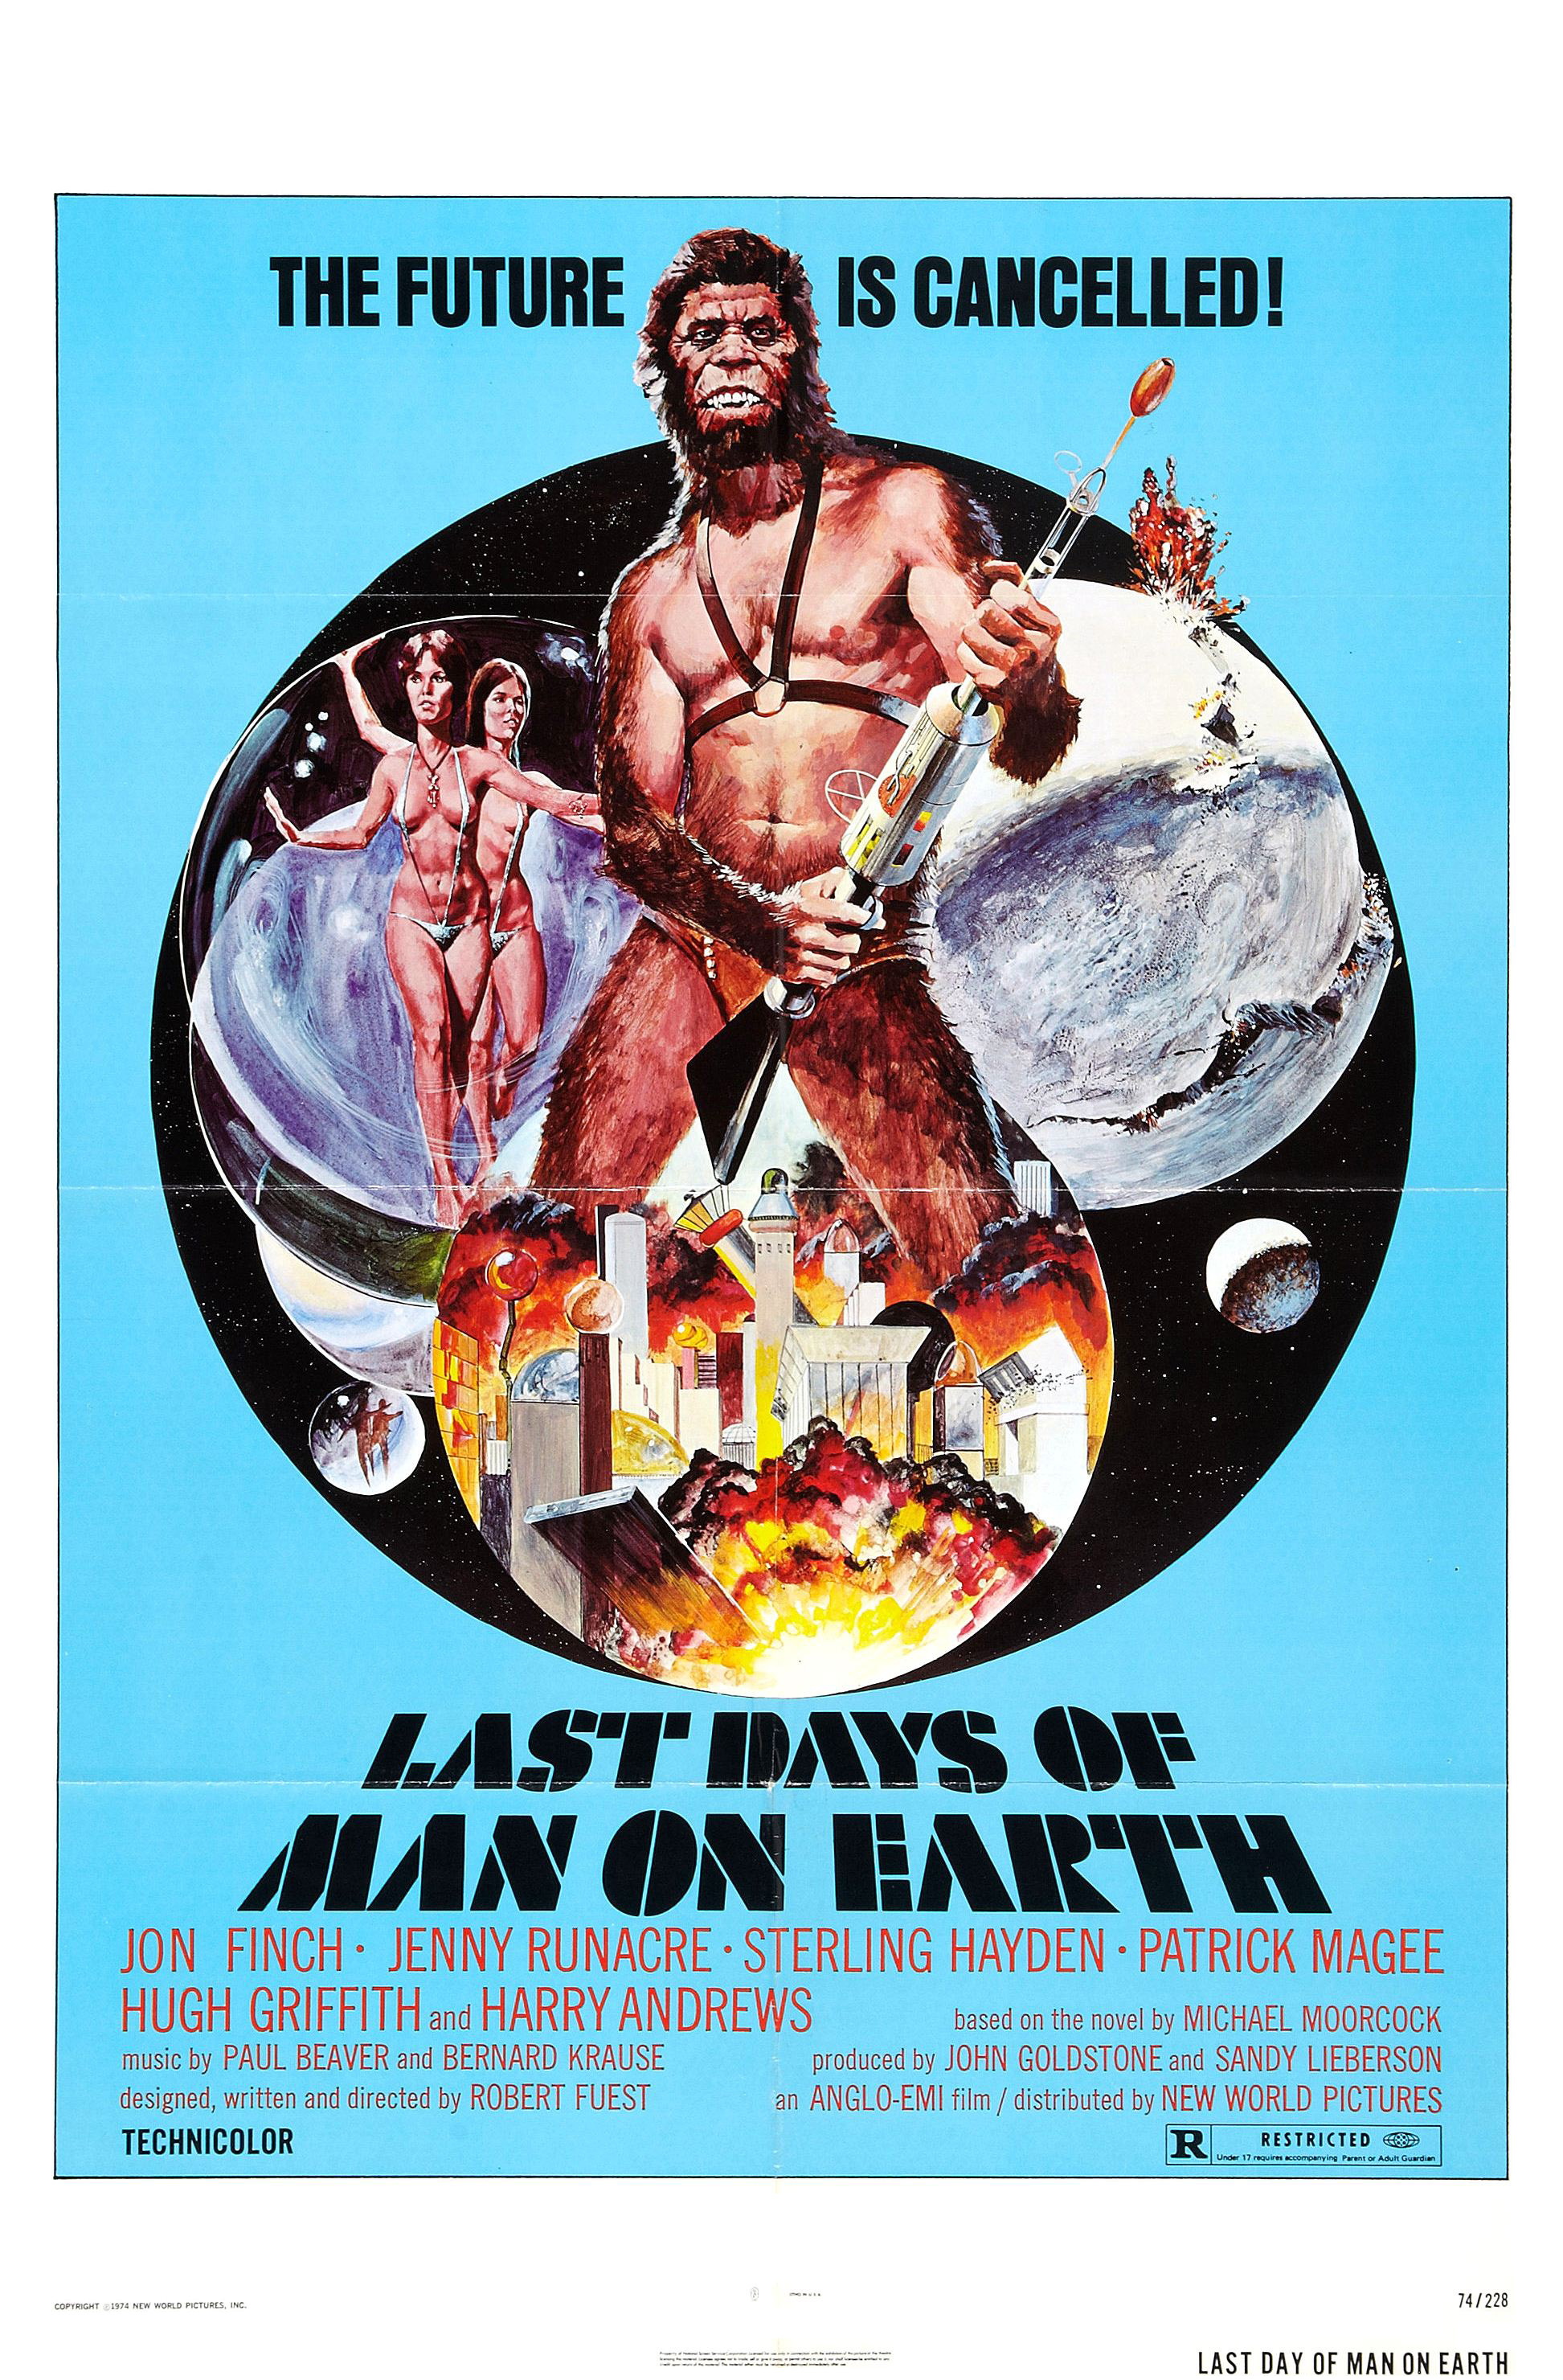 last days of man on earth - The Future Is Cancelled! Last Days Of Man On Earth Jon Finch Jenny Runacresterling Hayden Patrick Magee Hugh Griffith Harry Andrews Model Moroc Fe A Se Chinestone Behase Robert Fuest Ow N En Wolfsures Technicolor Ro Last Day O 